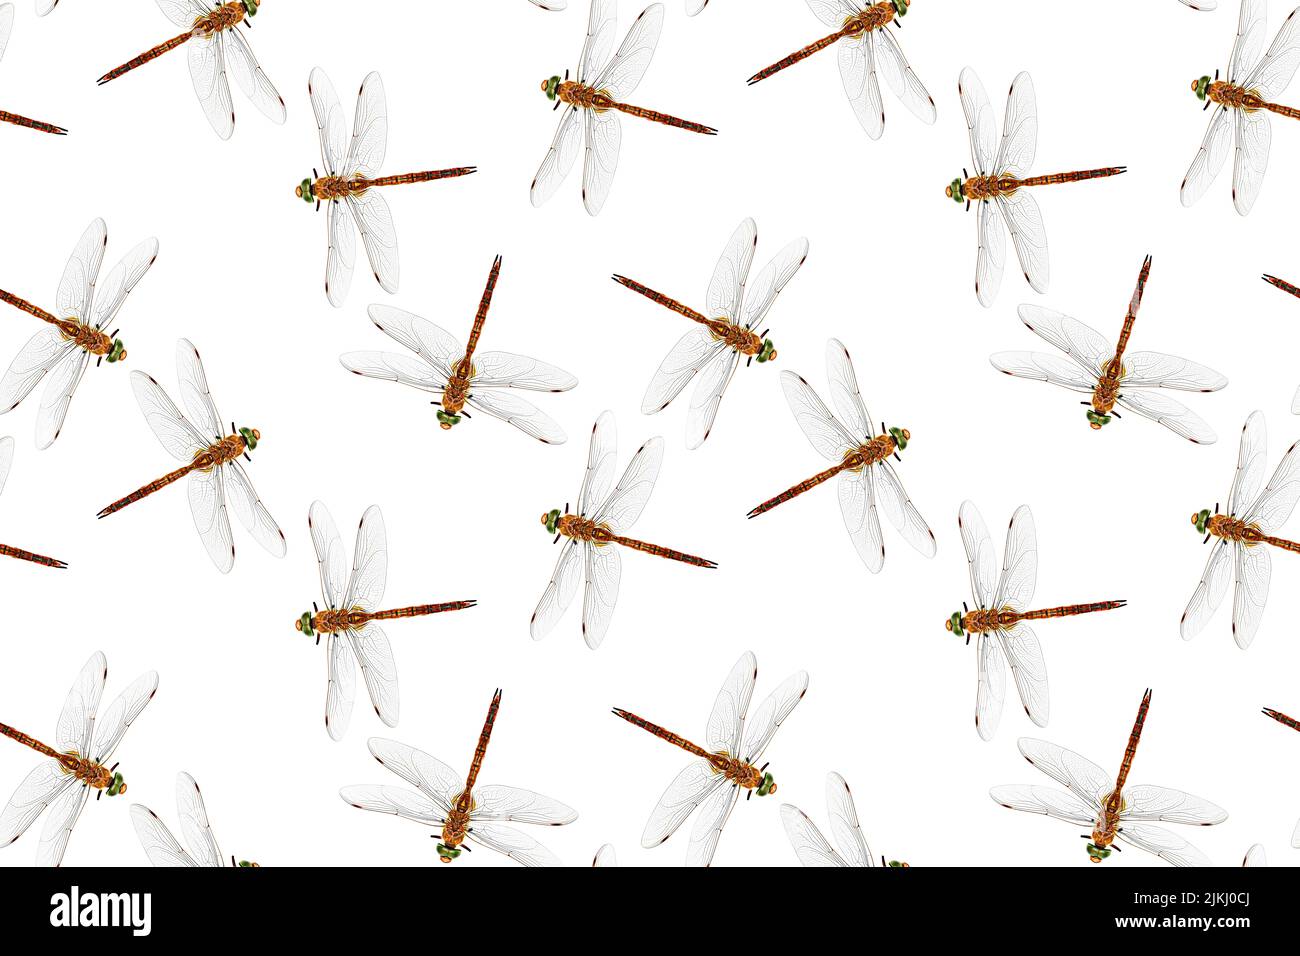 Photo stylized dragonfly isolated on white background. Seamless pattern. Repeating texture. Stock Photo